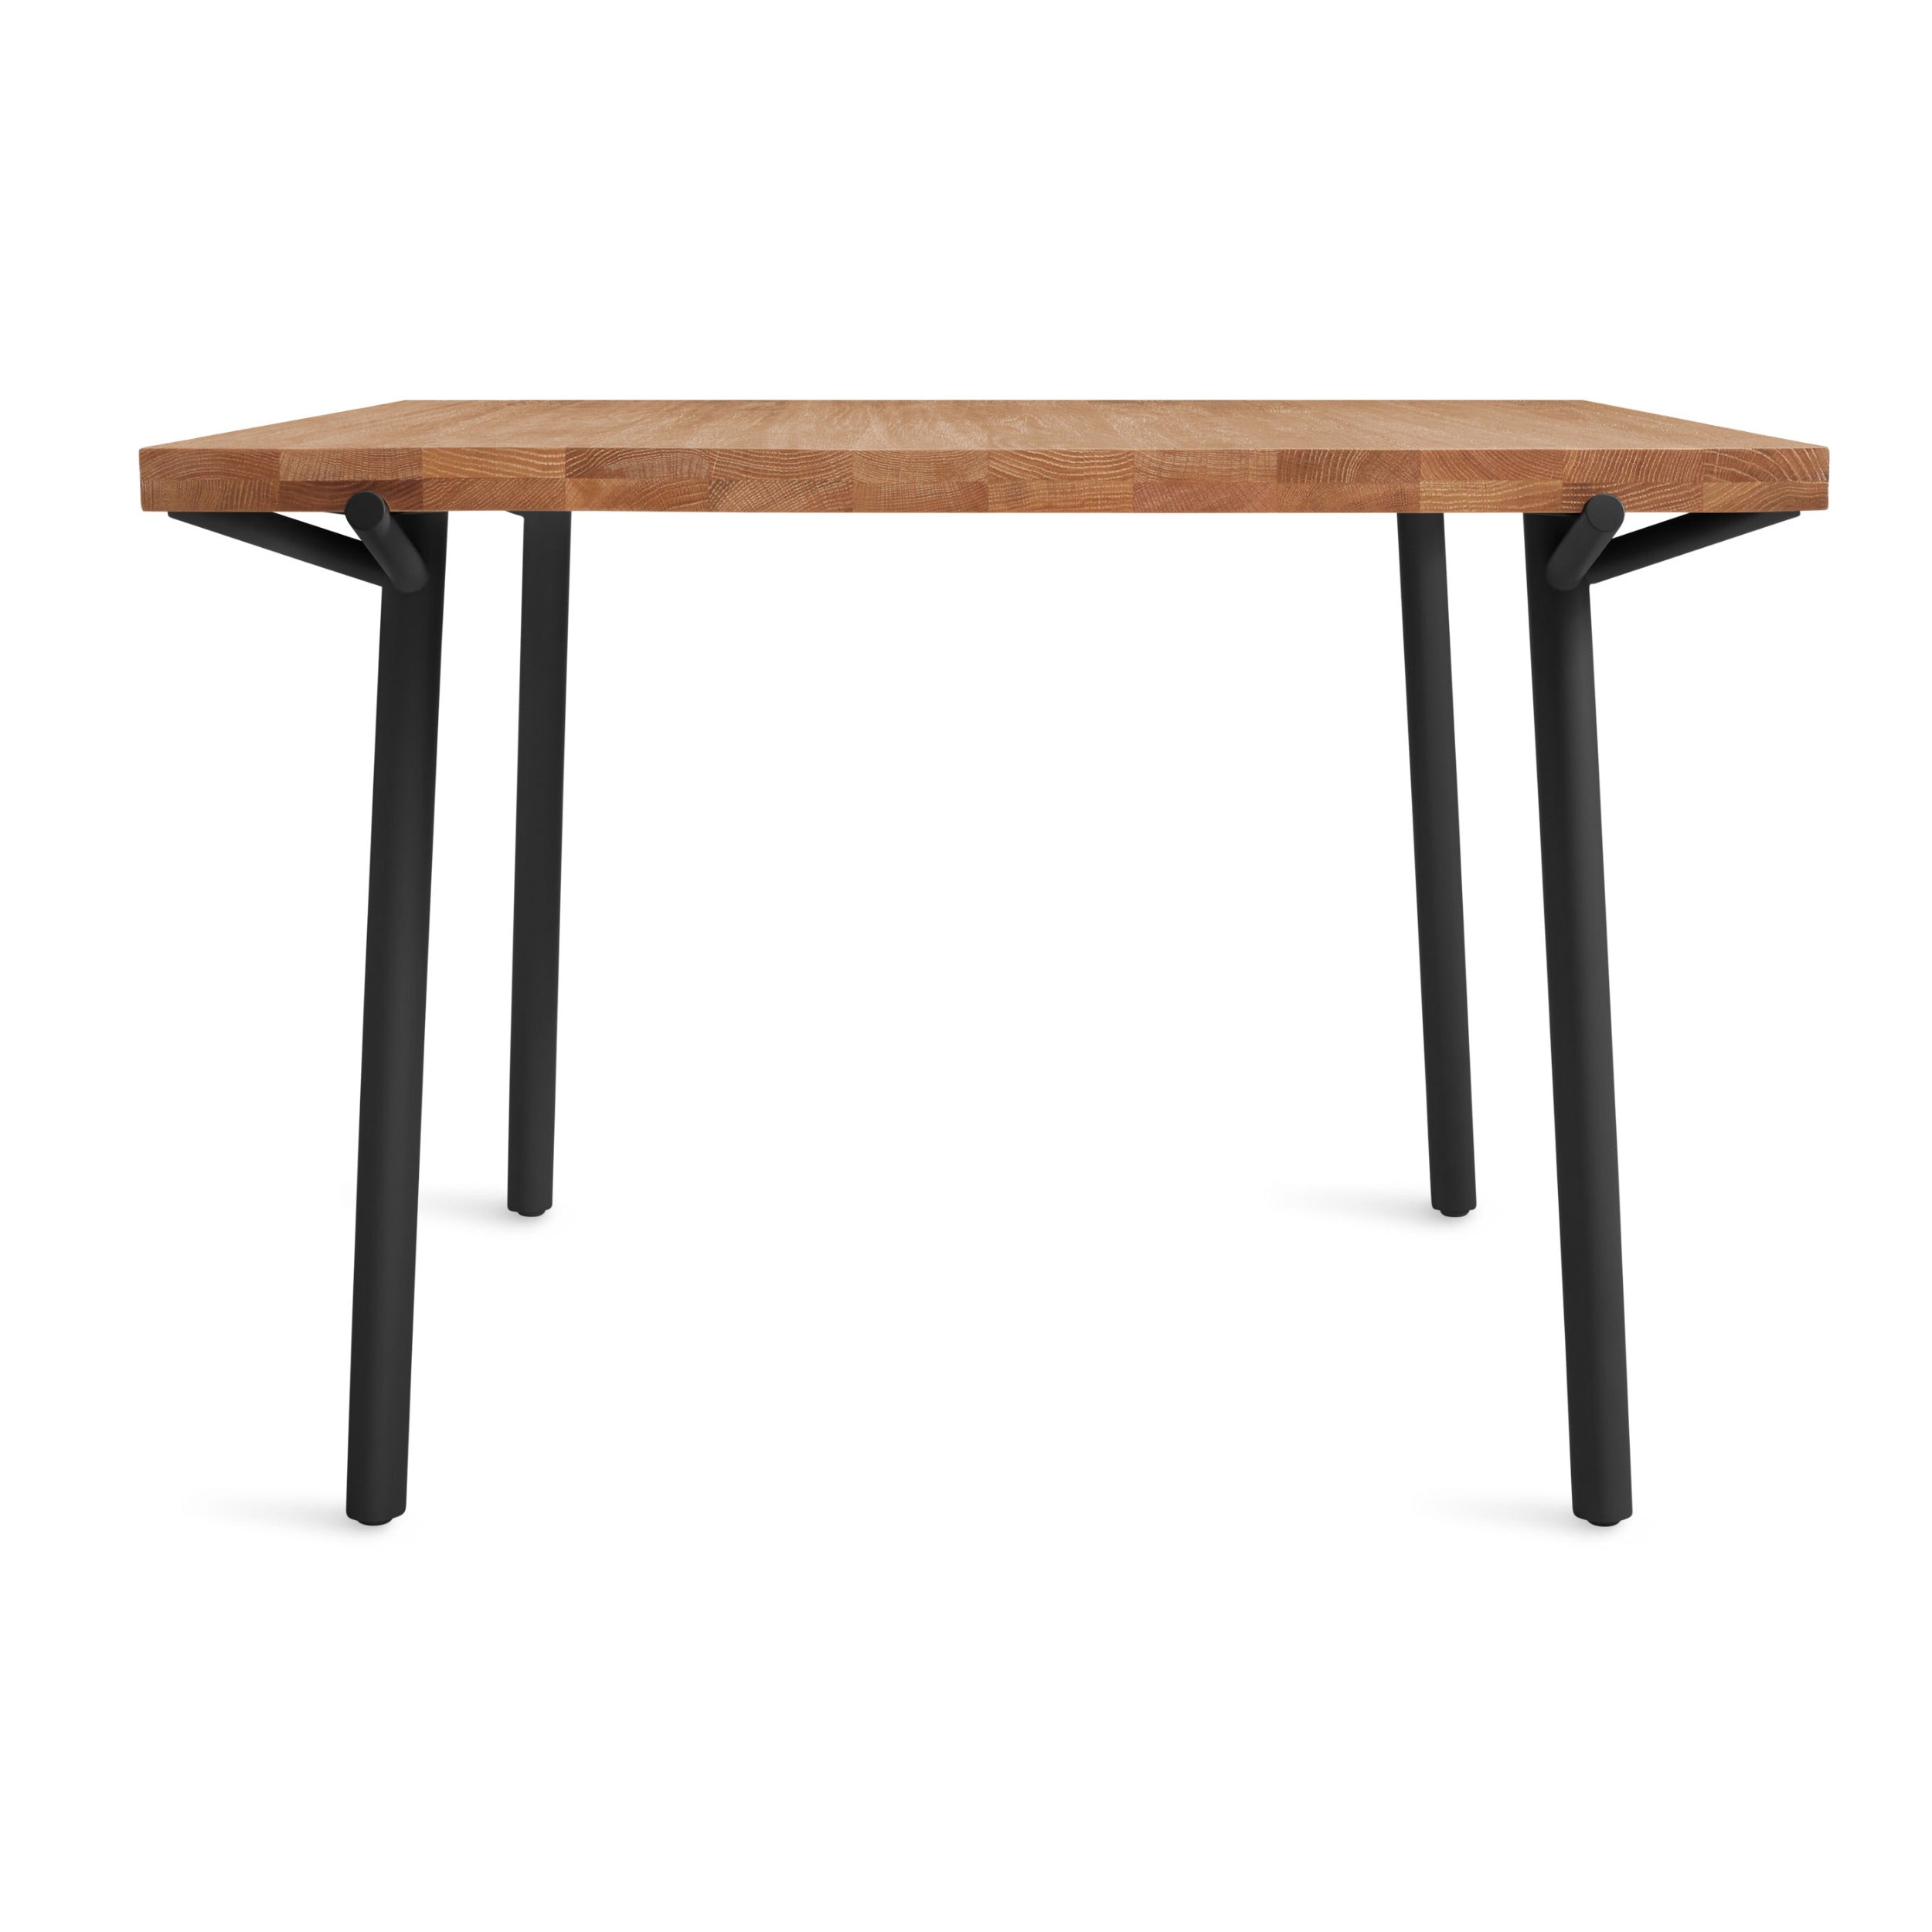 Branch Square Dining Table